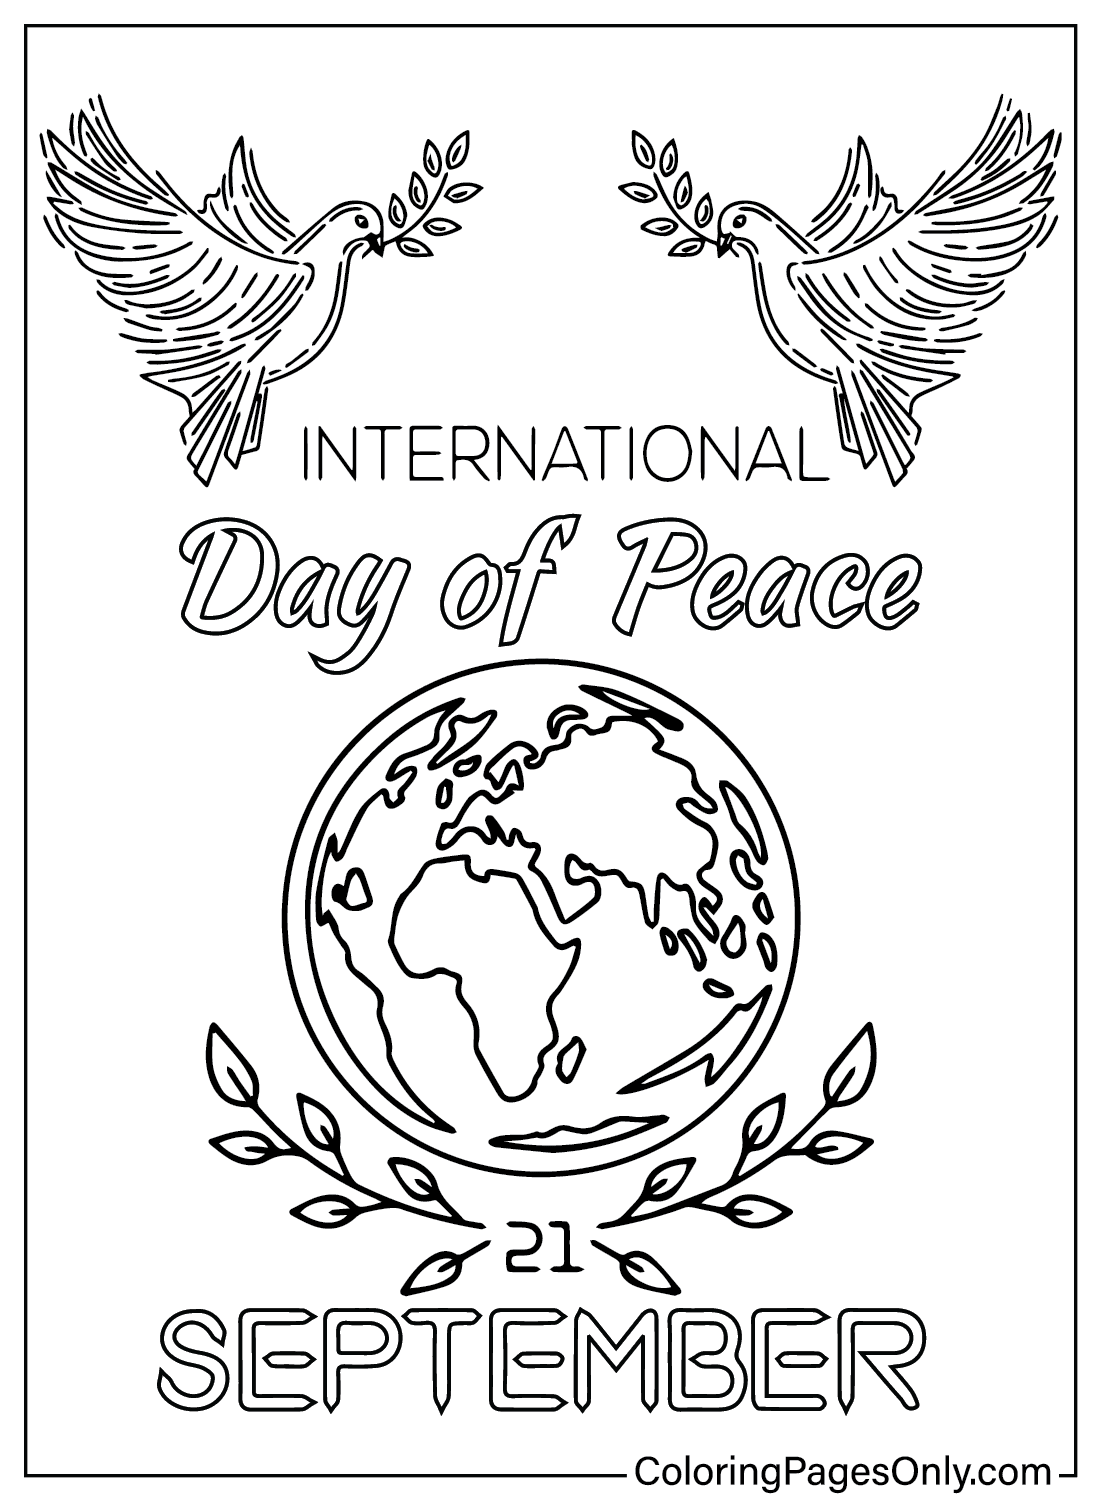 International Day of Peace Coloring Pages to Download